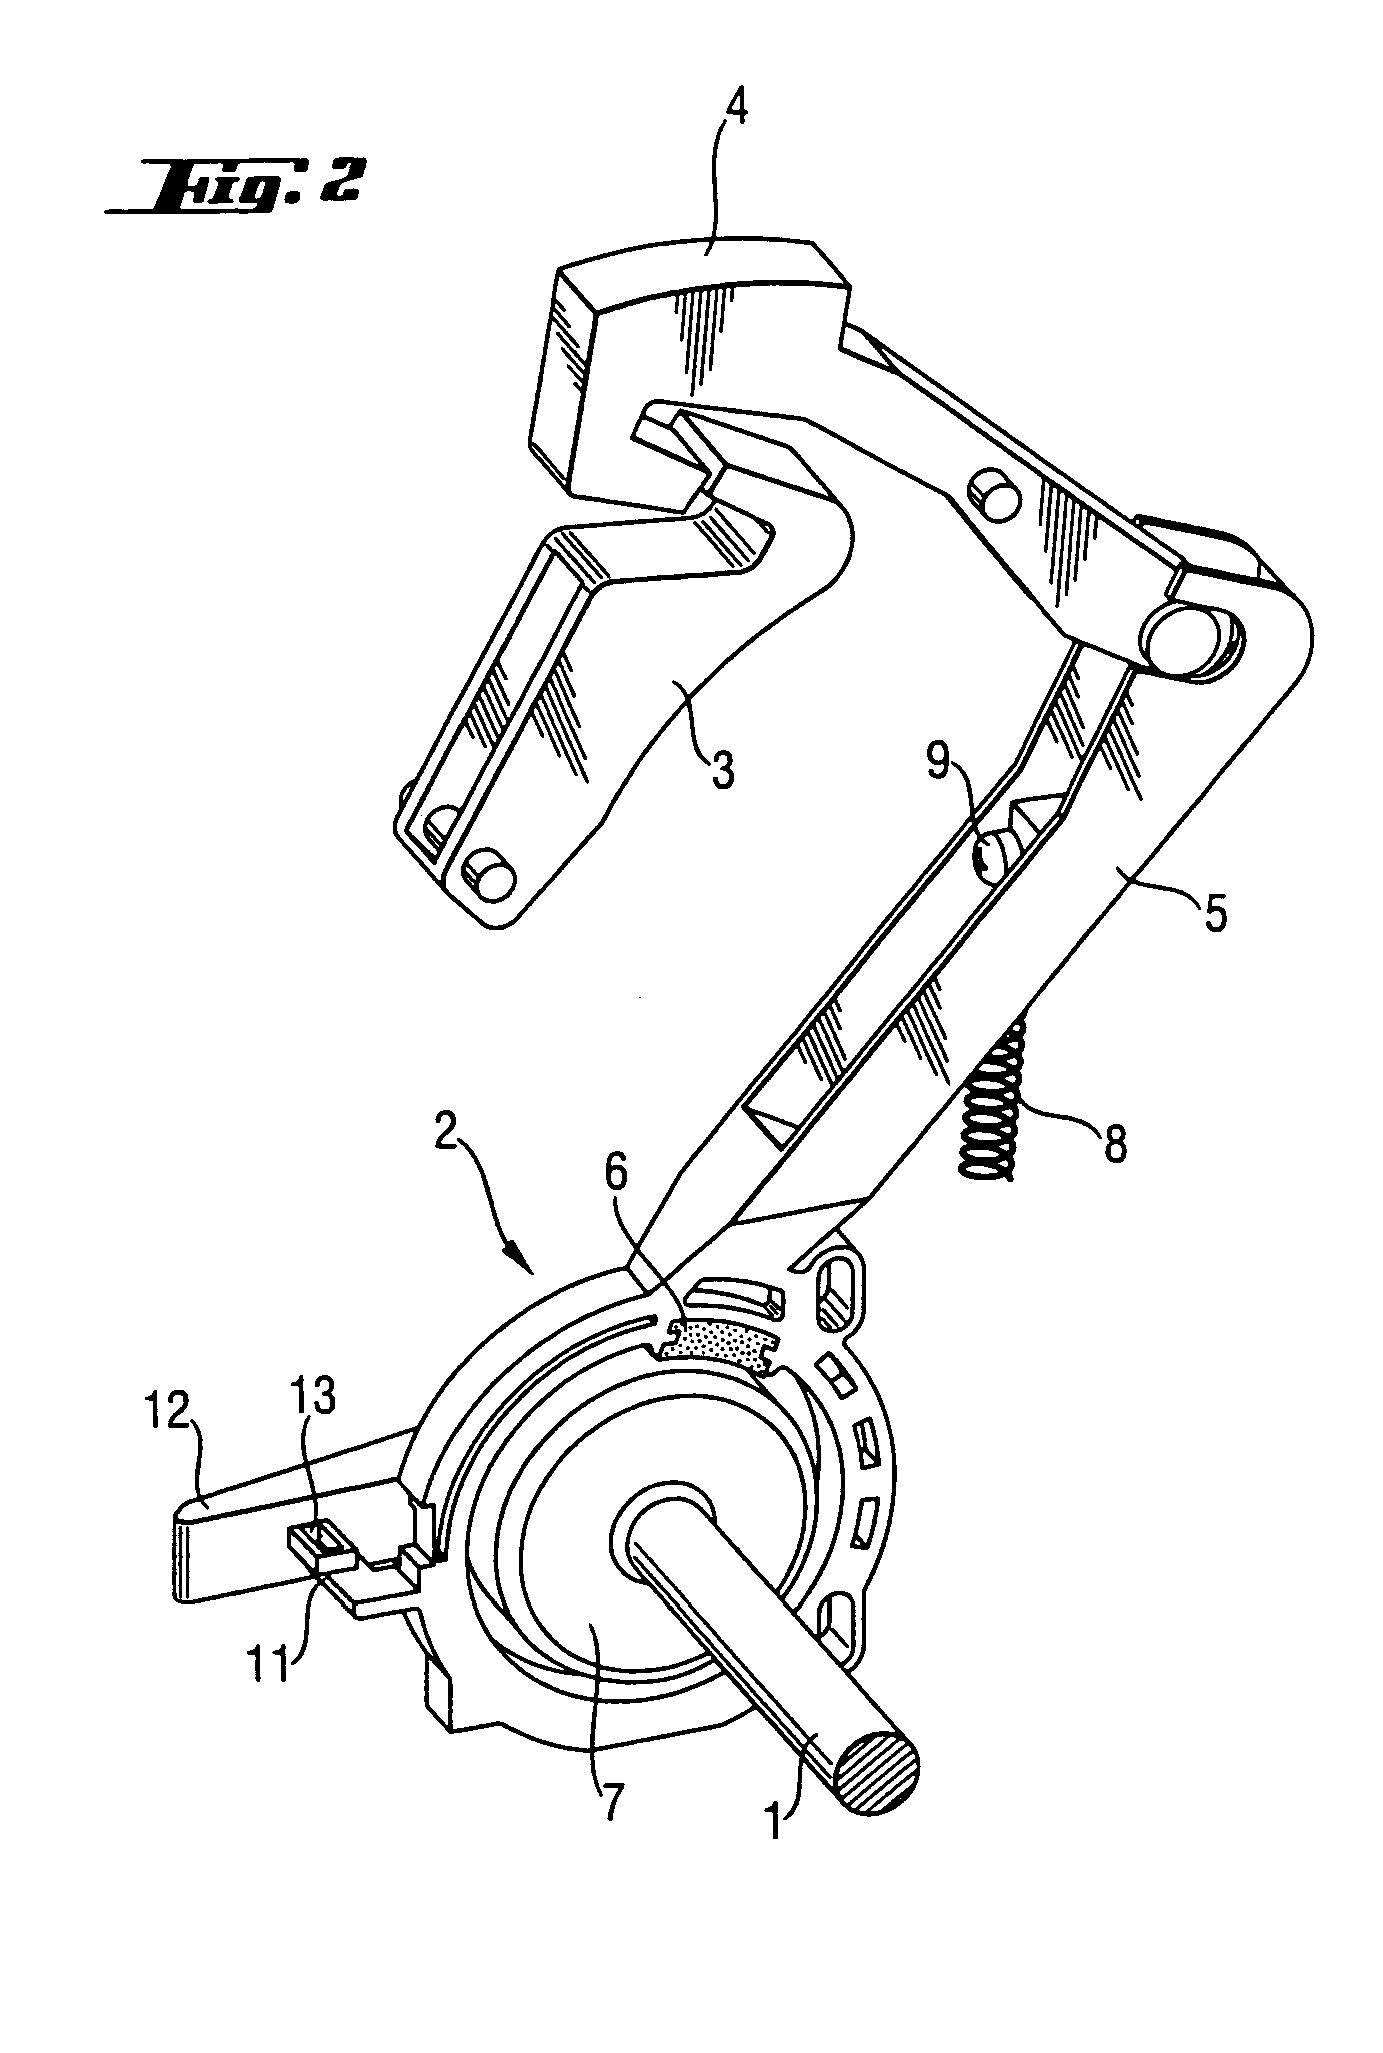 Electric power tool with locking mechanism